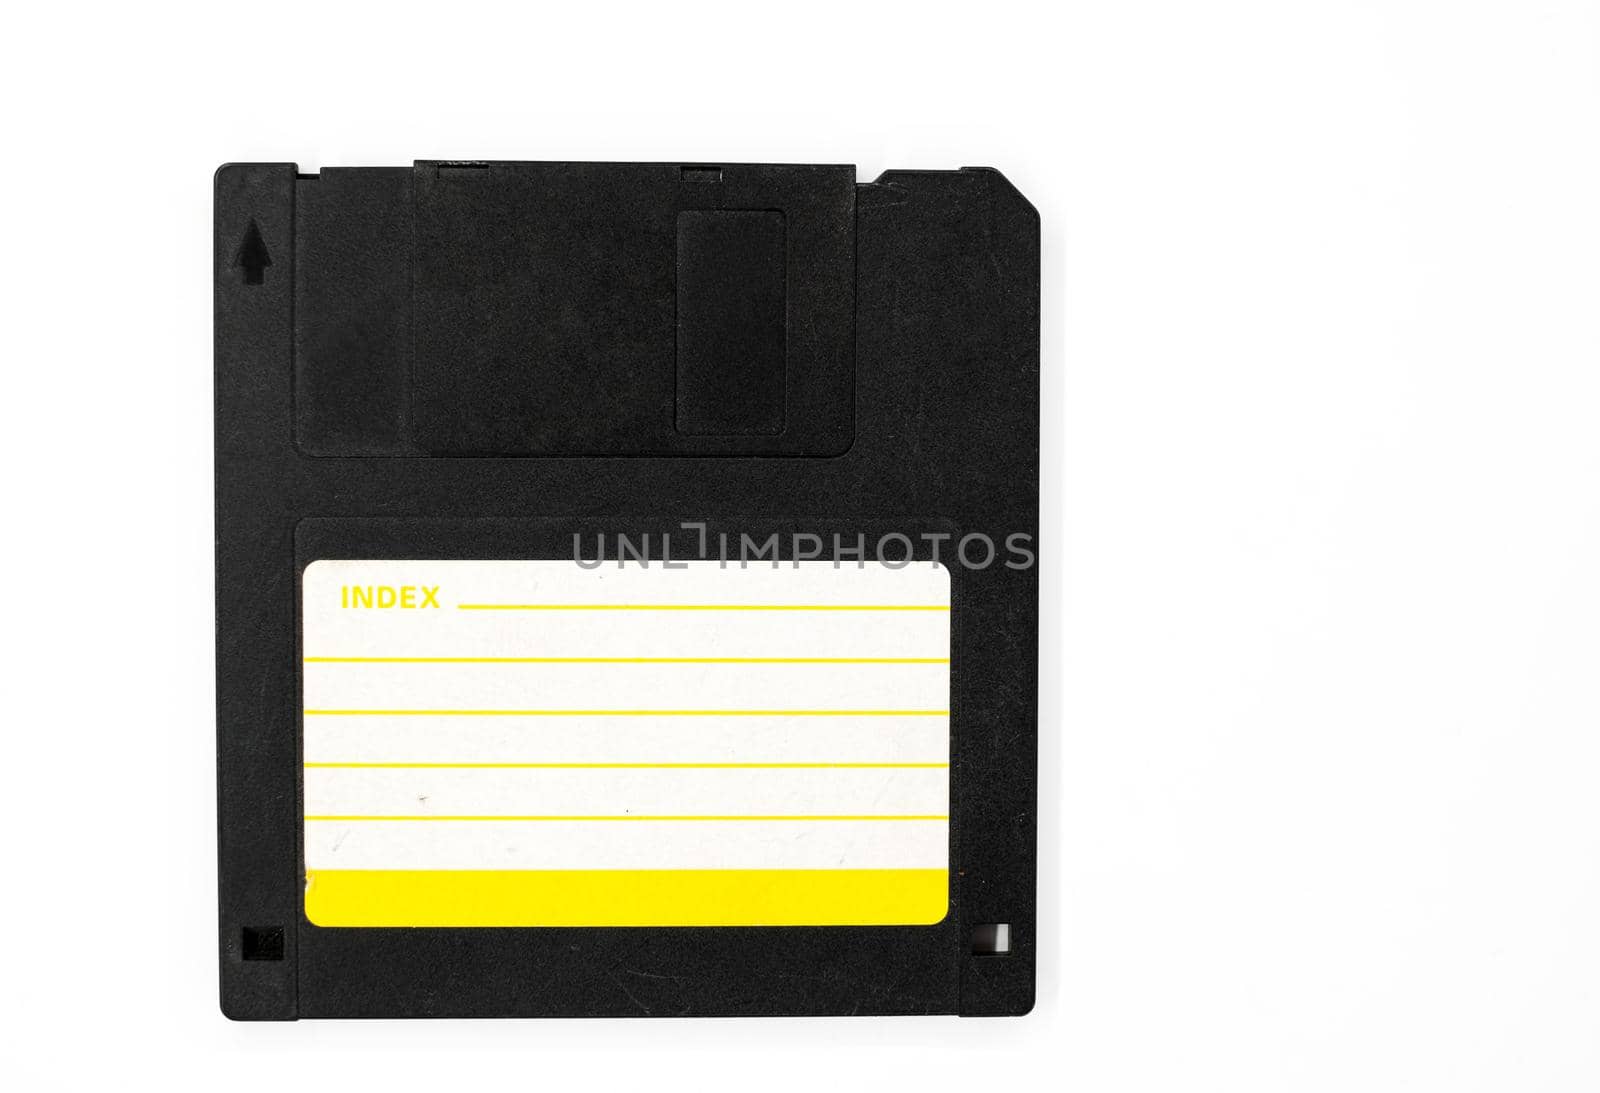 Black floppy disk with blank label on white background